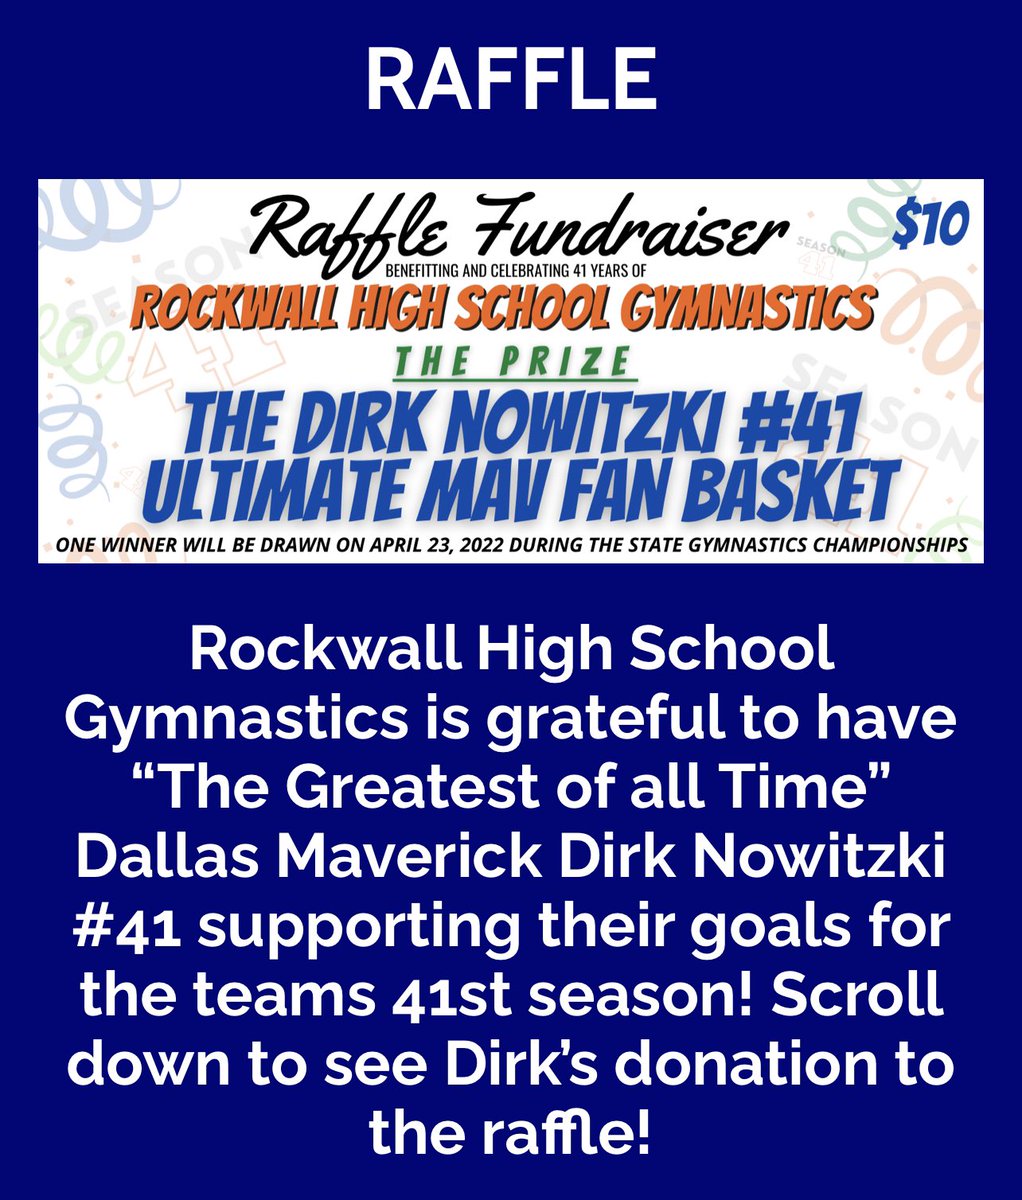 This is a really cool fundraiser supporting Rockwall High School Gymnastics. You can buy tickets with the link thsgcastate2022.com/raffle/ @RISDAthletics @ROCOgameday @RHS_PTA @rhsgirlsgym @RHSMenGym